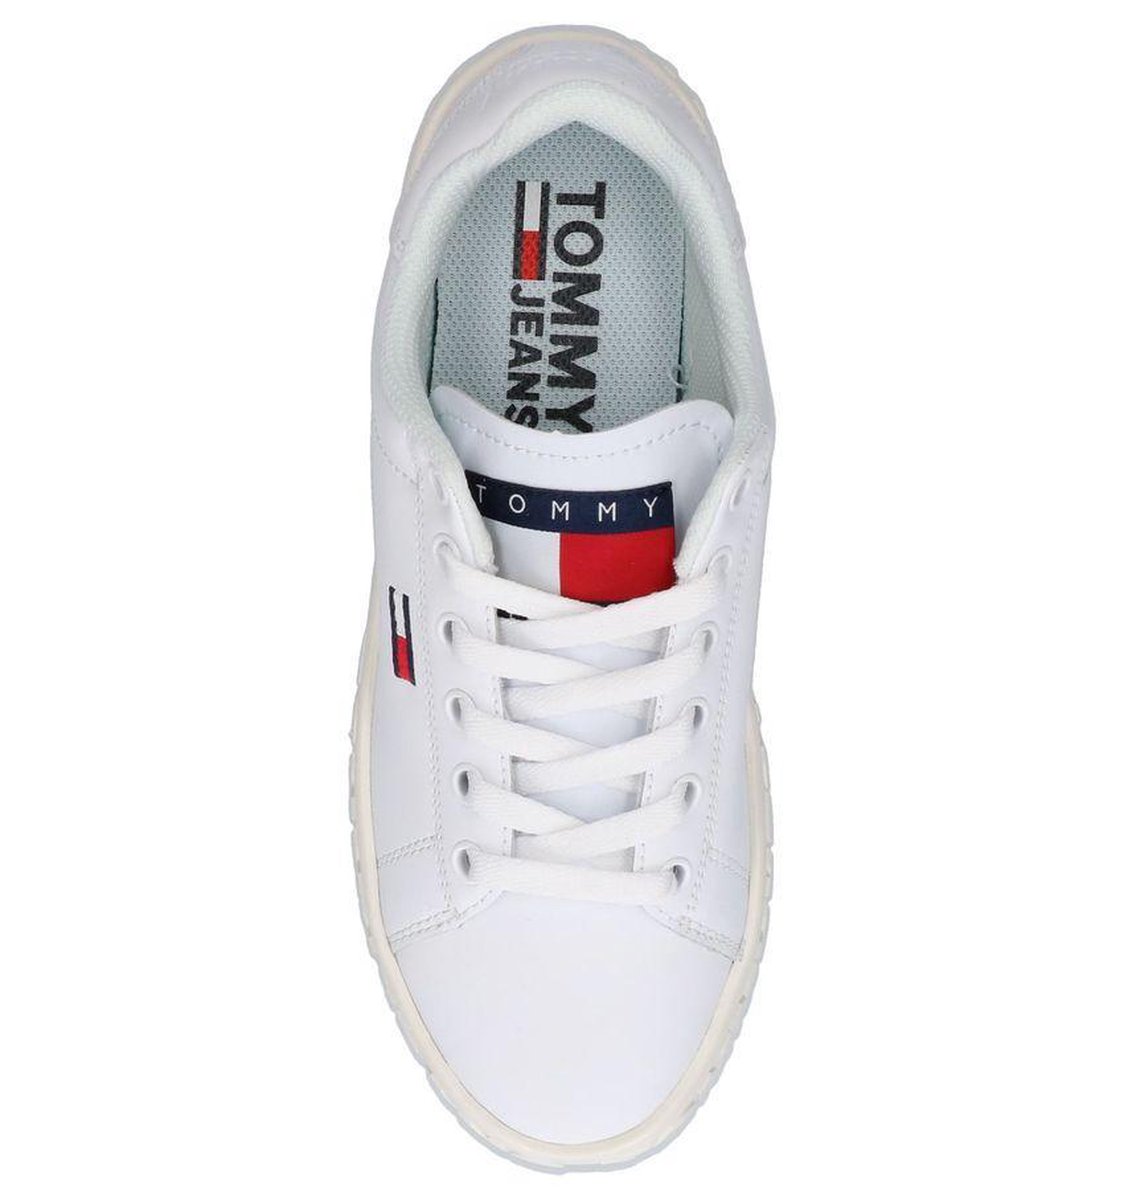 Witte Sneakers Tommy Hilfiger Cool Tommy Jeans | bol.com